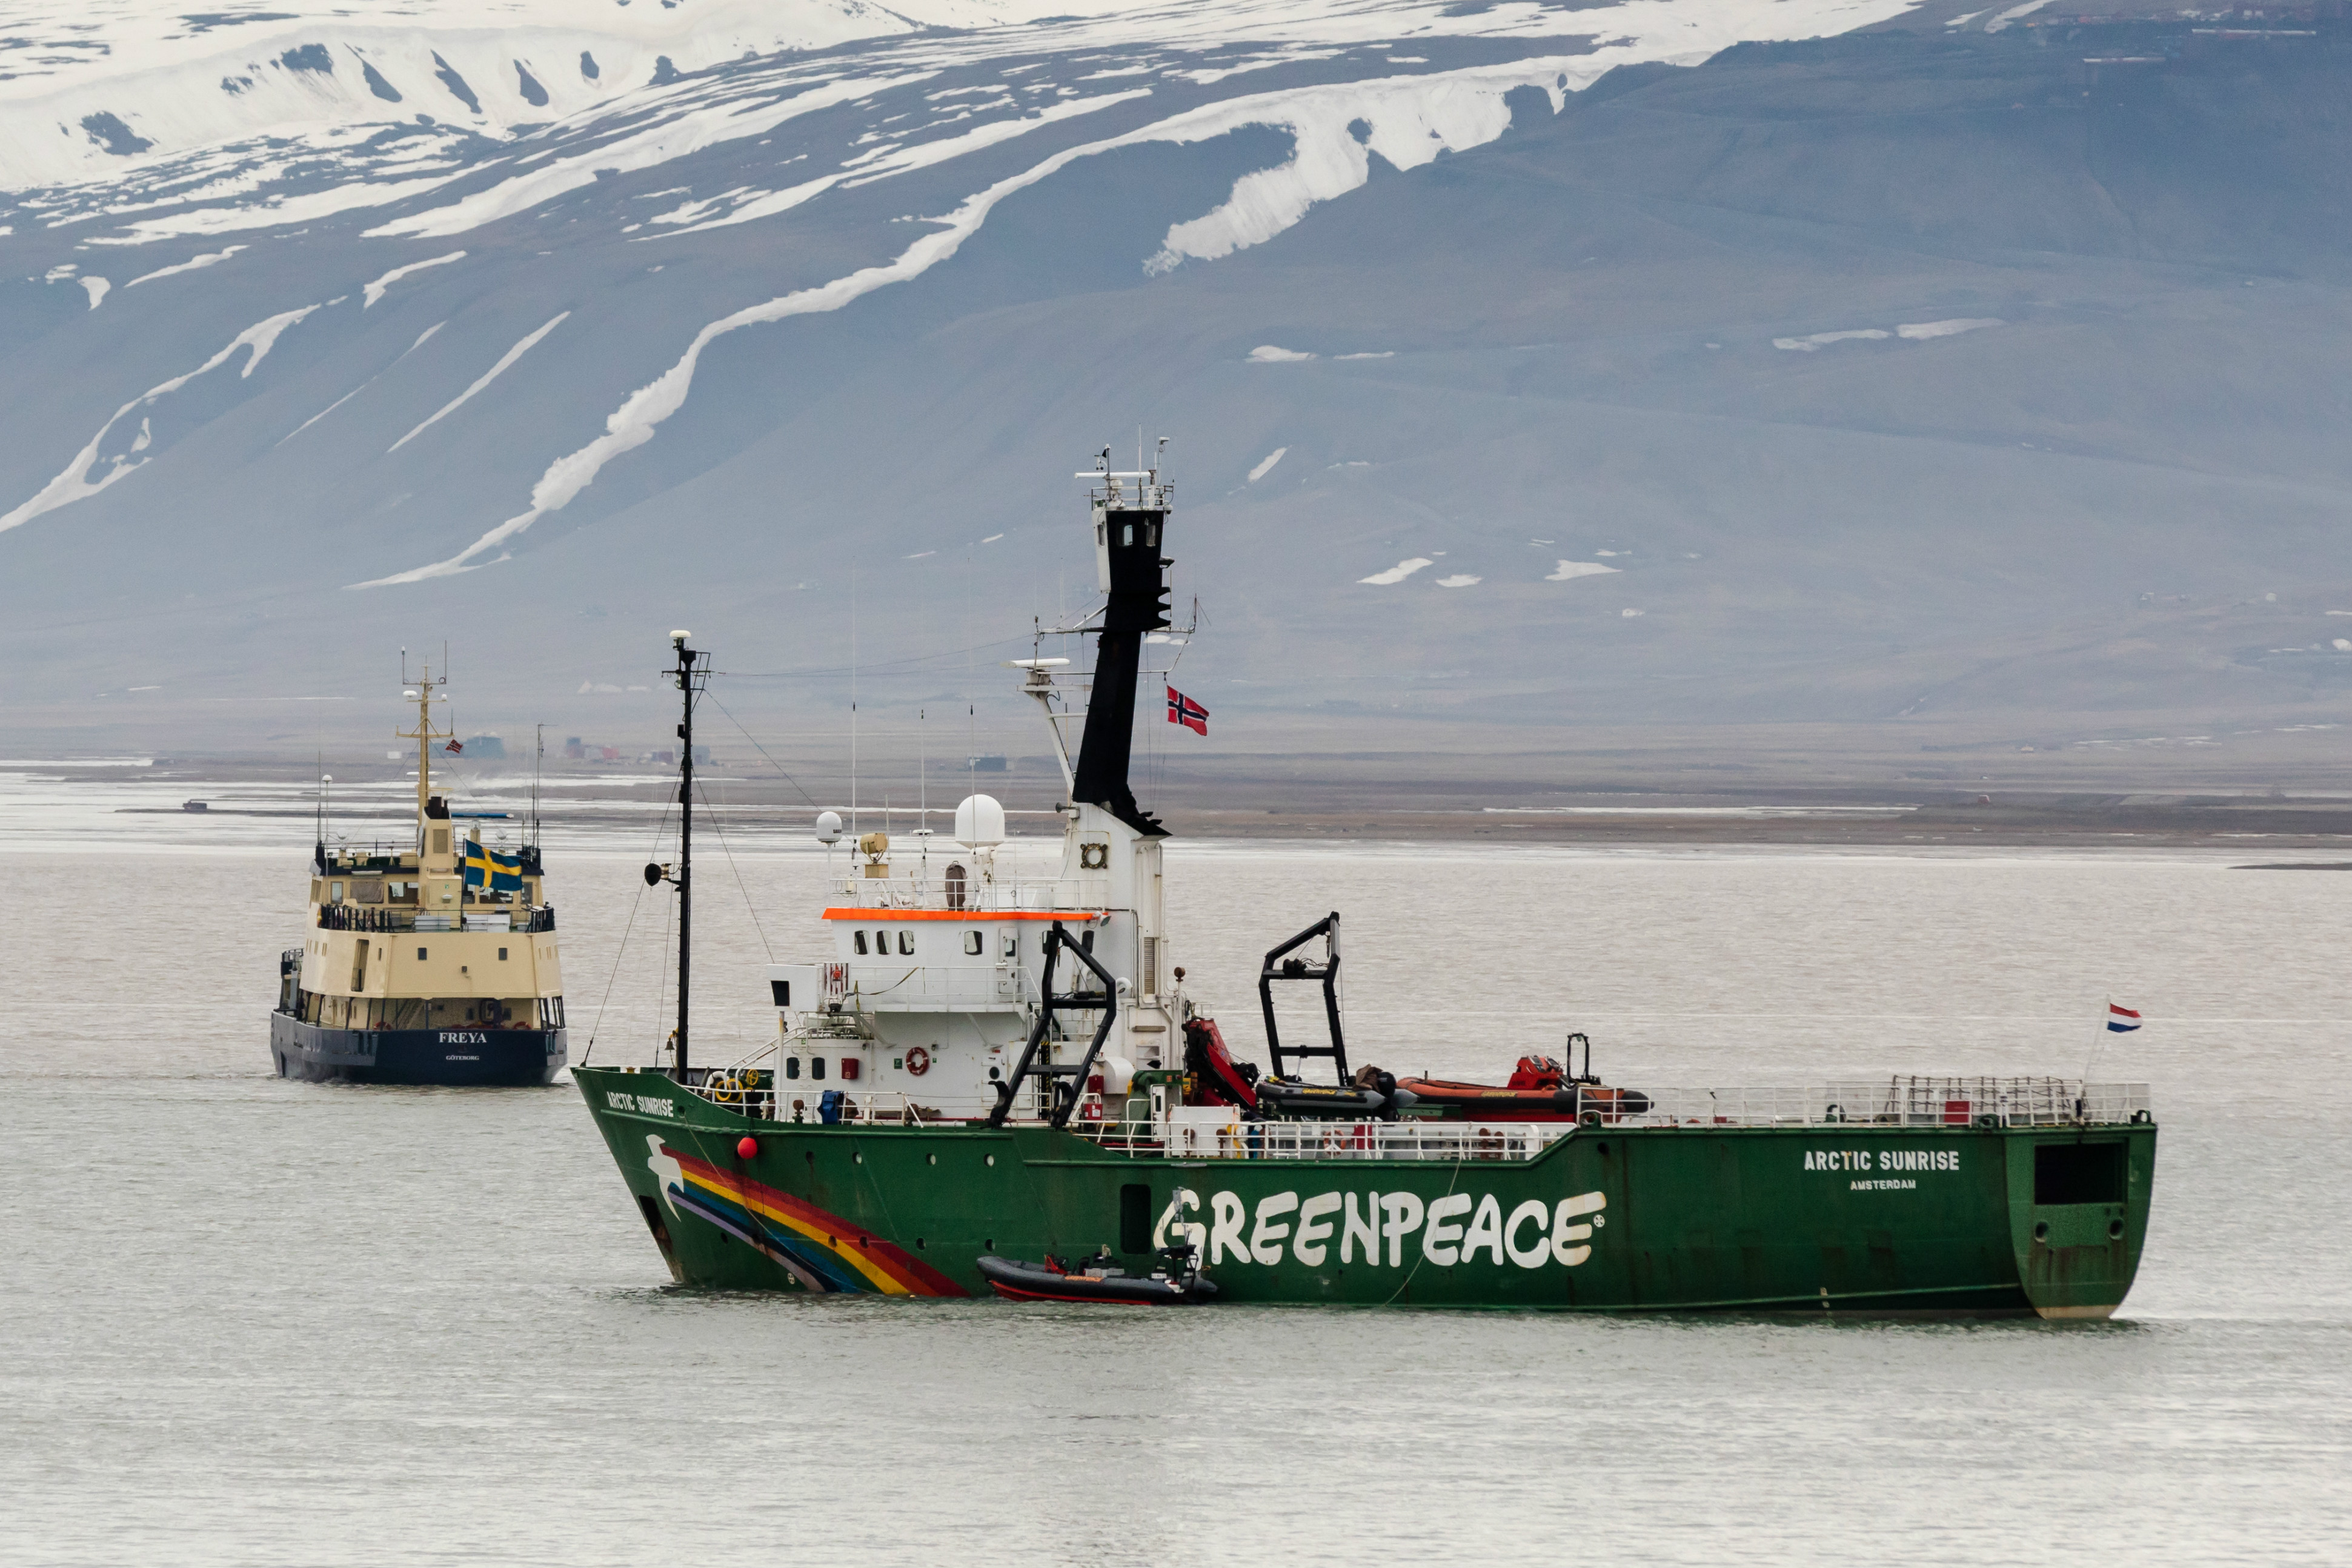 The Greenpeace ship Arctic Sunrise anchored in the Advent fjord (Adventfjorden) near the town of Longyearbyen in Spitsbergen in the Svalbard Archipelago in 2016. (Getty)